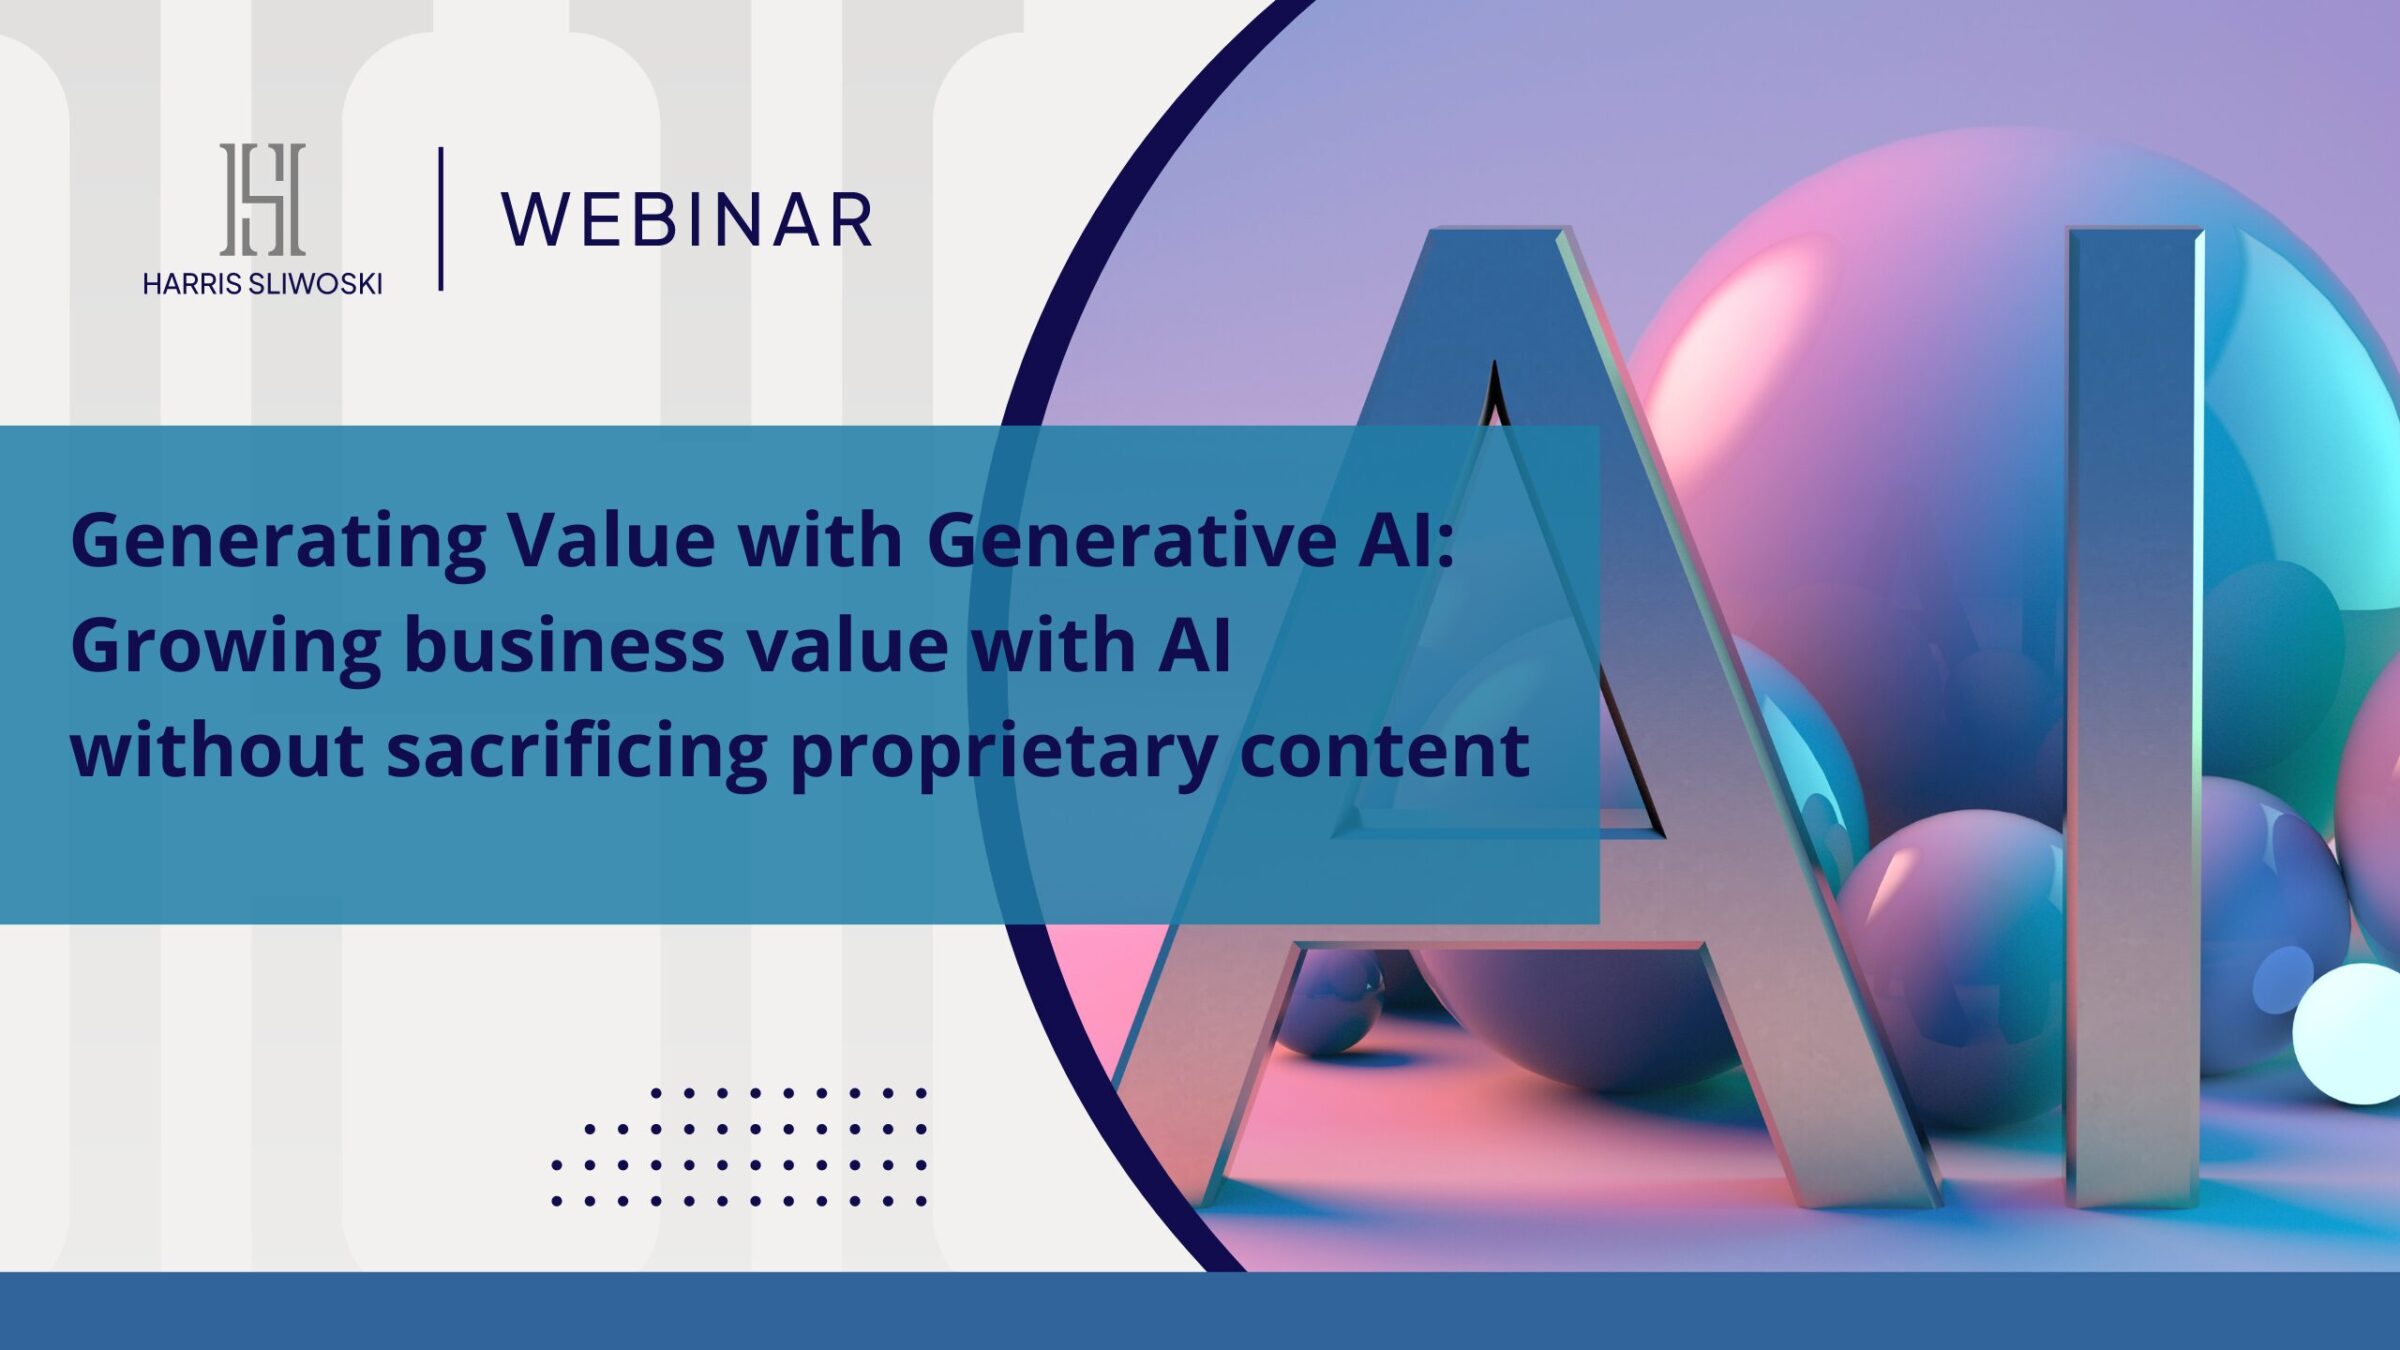 Generating Value with Generative AI: Growing Business Value with AI without Sacrificing Proprietary Content